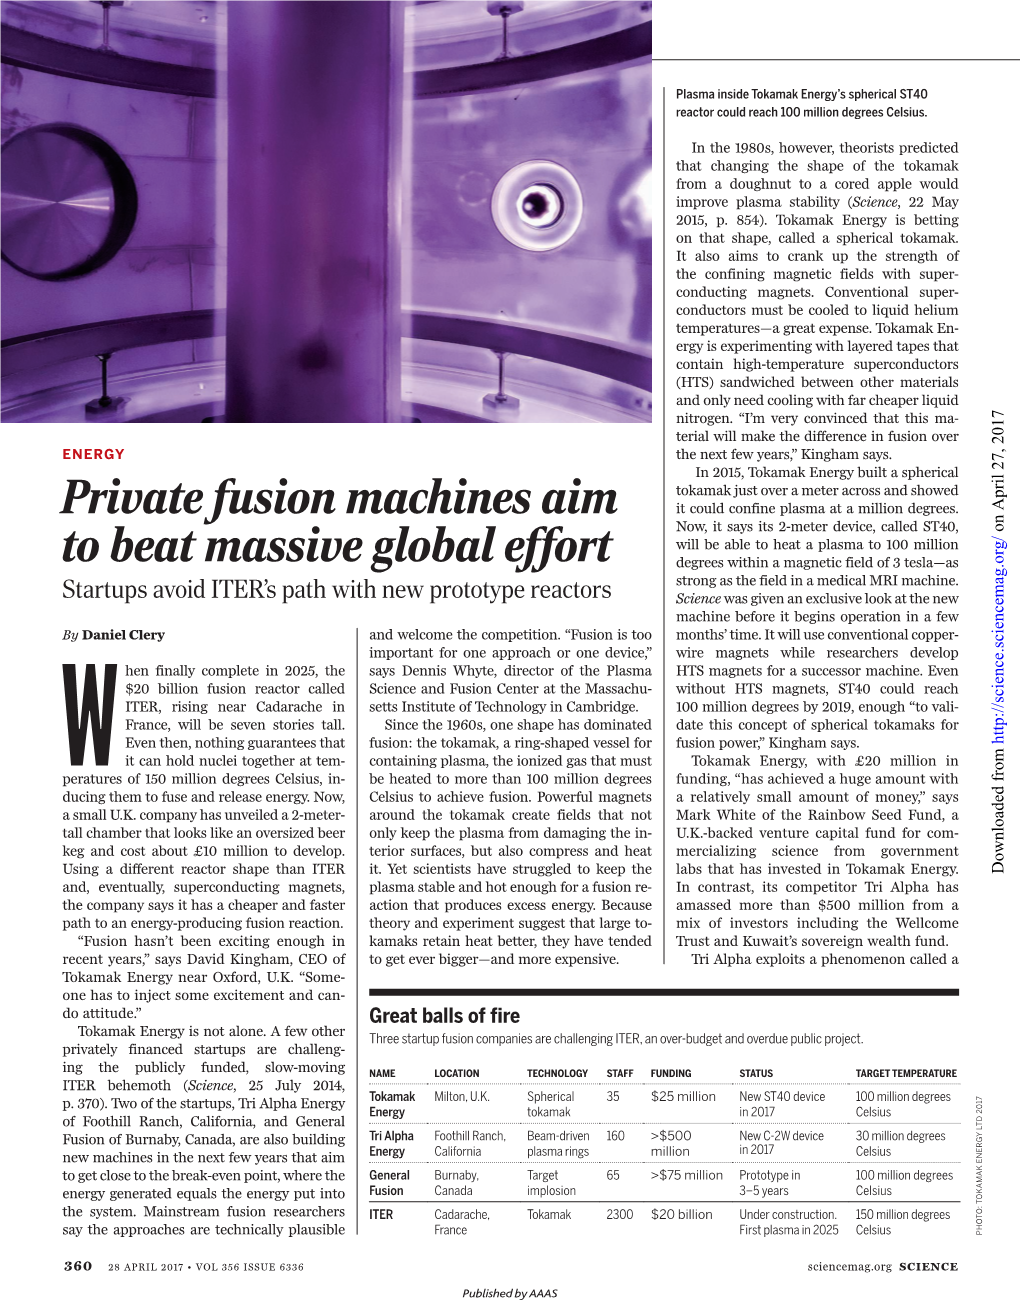 Private Fusion Machines Aim to Beat Massive Global Effort Daniel Clery (April 27, 2017) Science 356 (6336), 360-361